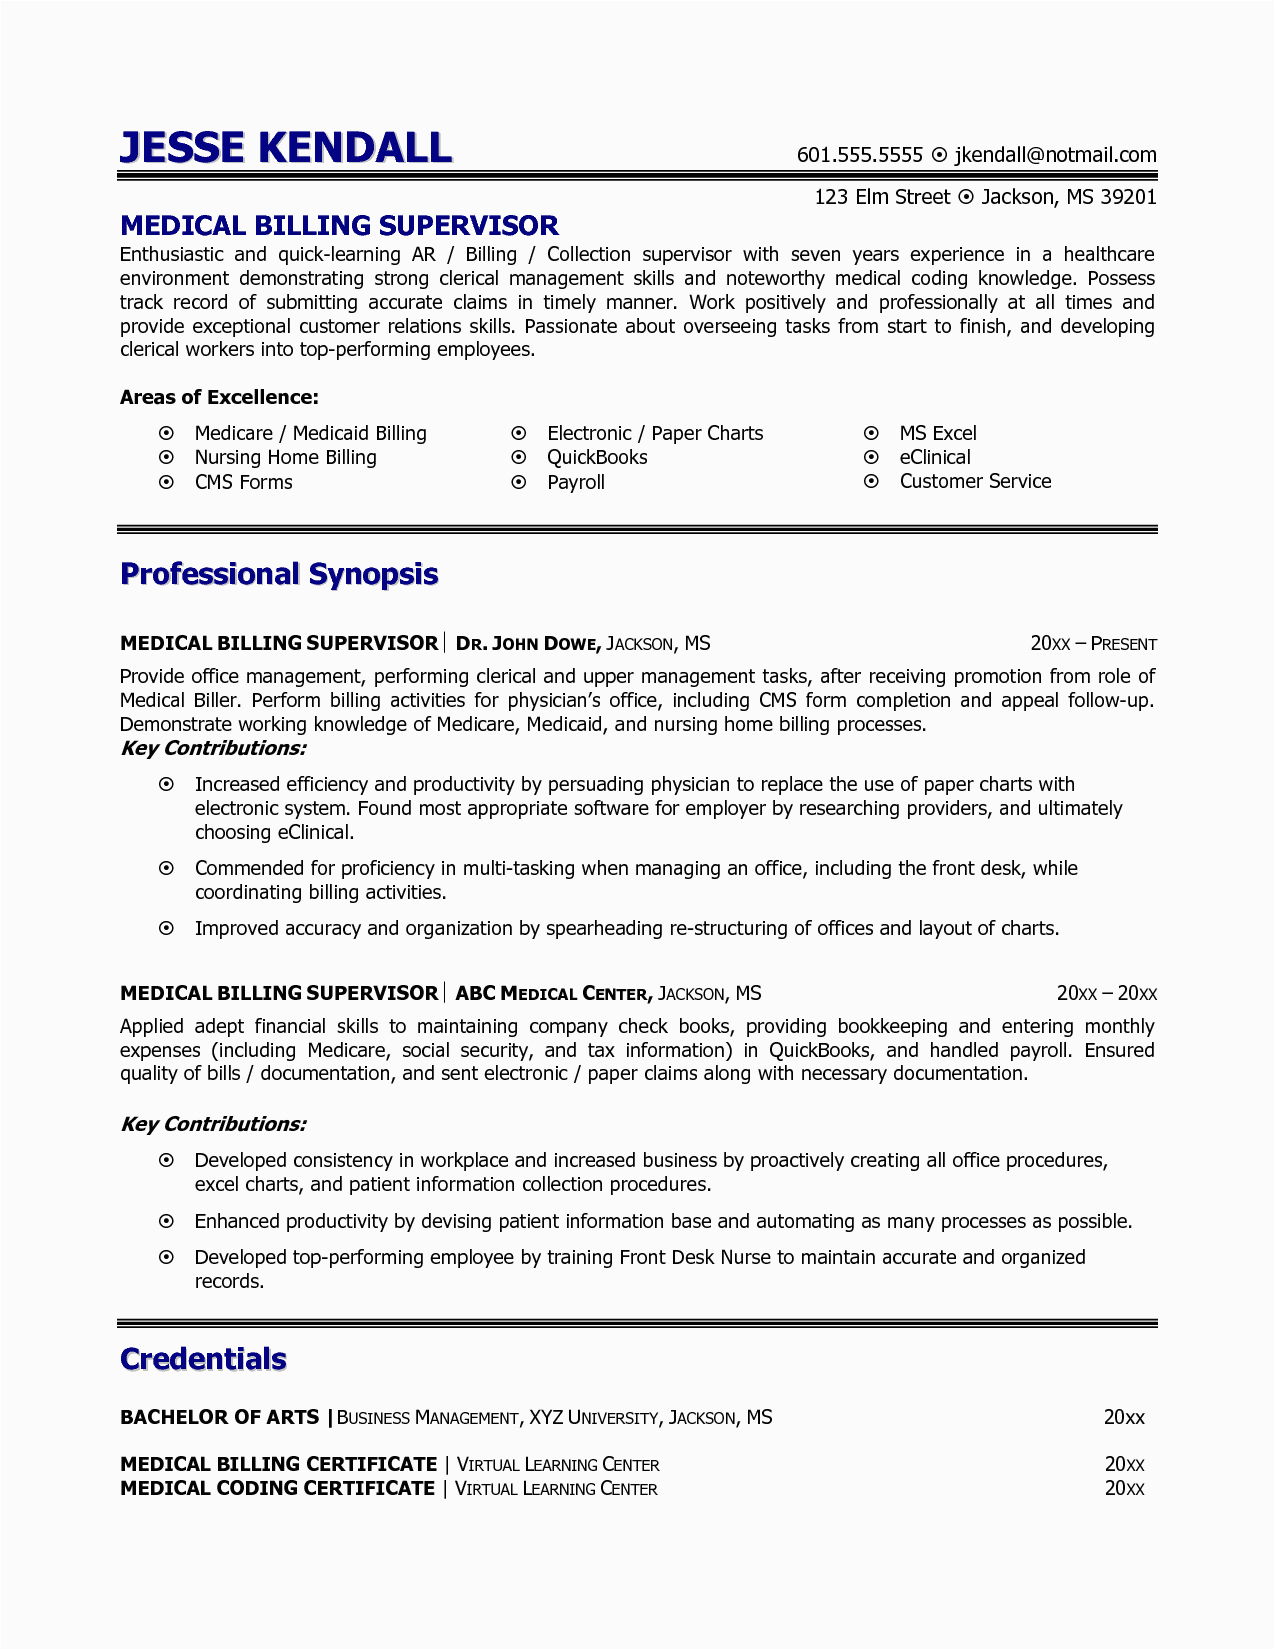 Free Medical Billing and Coding Resume Templates Medical Billing and Coding Resume Example